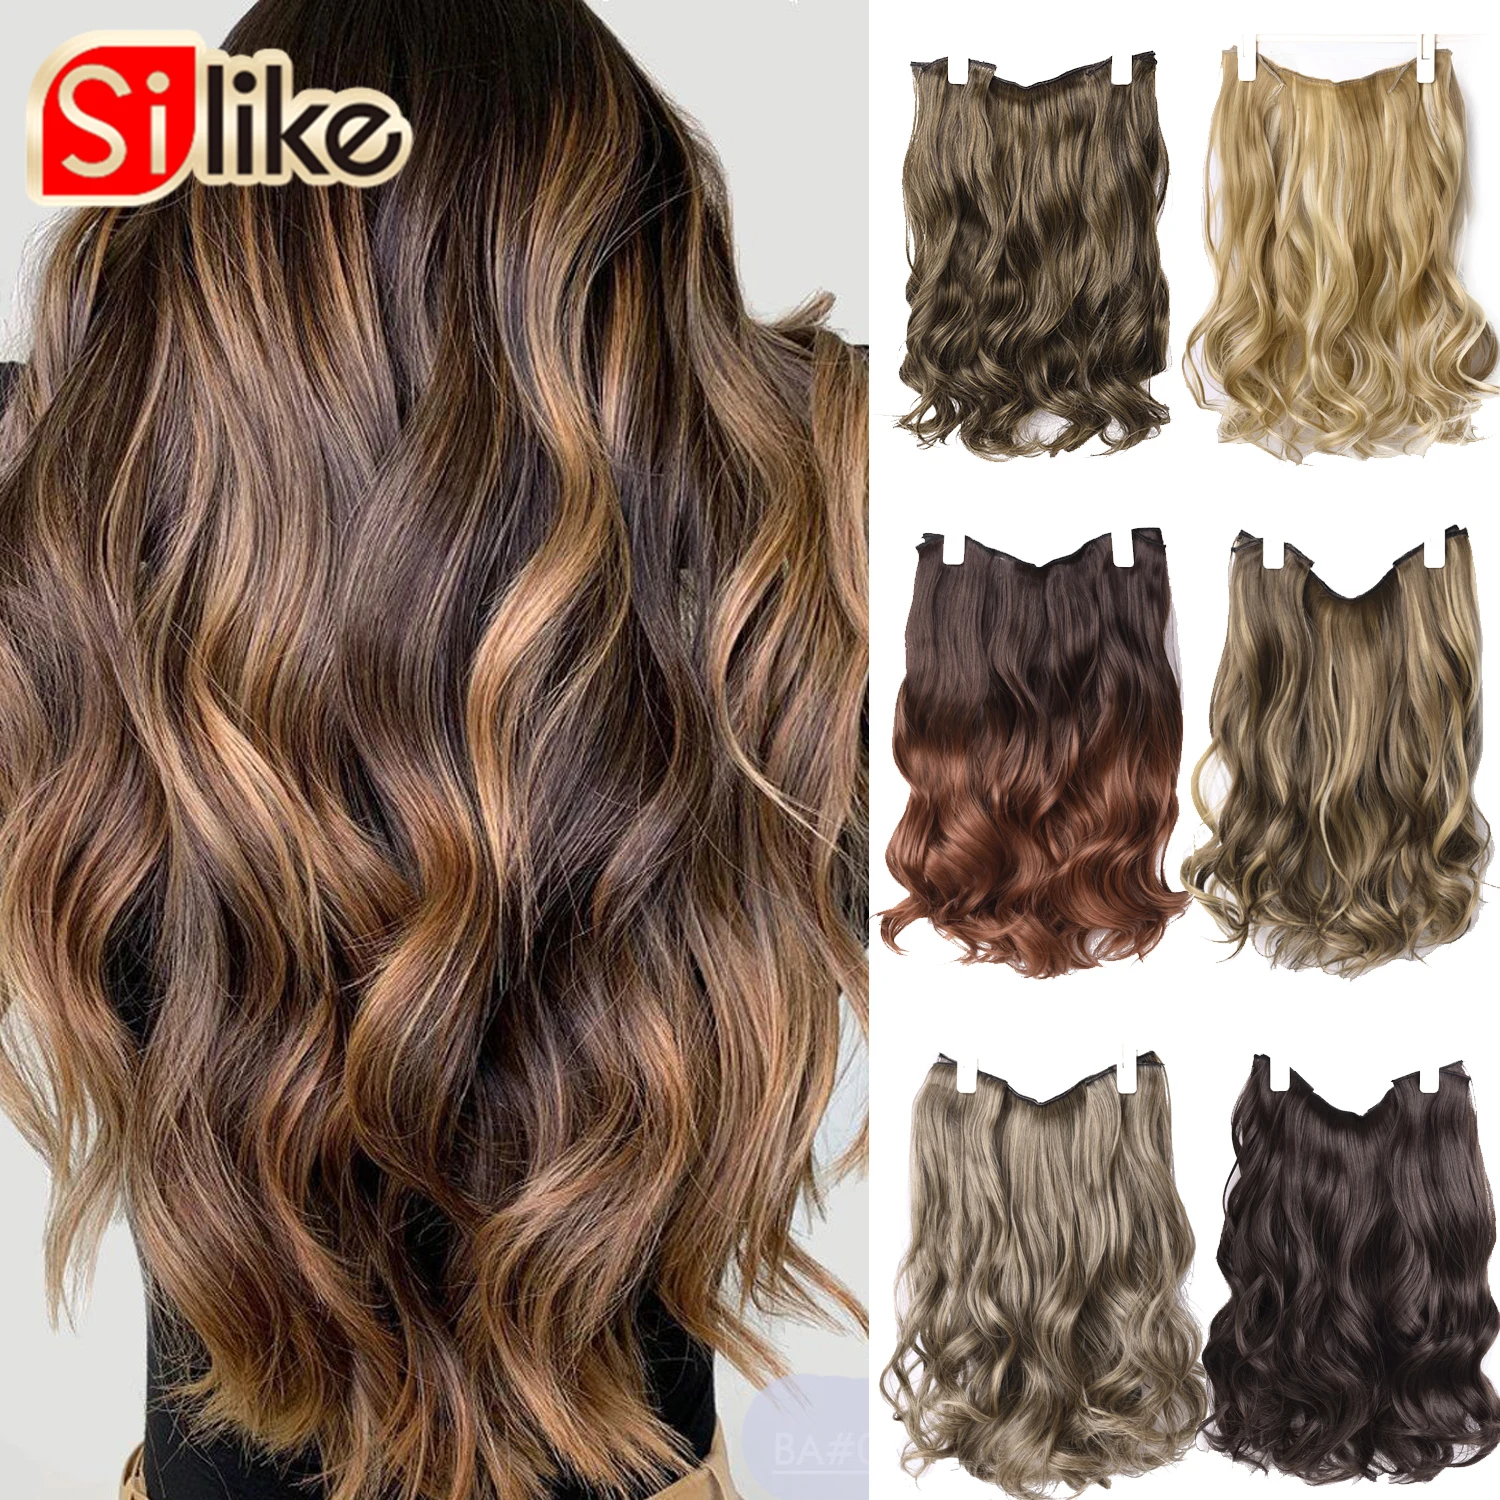 Silike Fish Line Hair 6 Clips Synthetic Clips In Hair Extensions Wavy Heat Resistant Invisible Wire Three pieces For Women